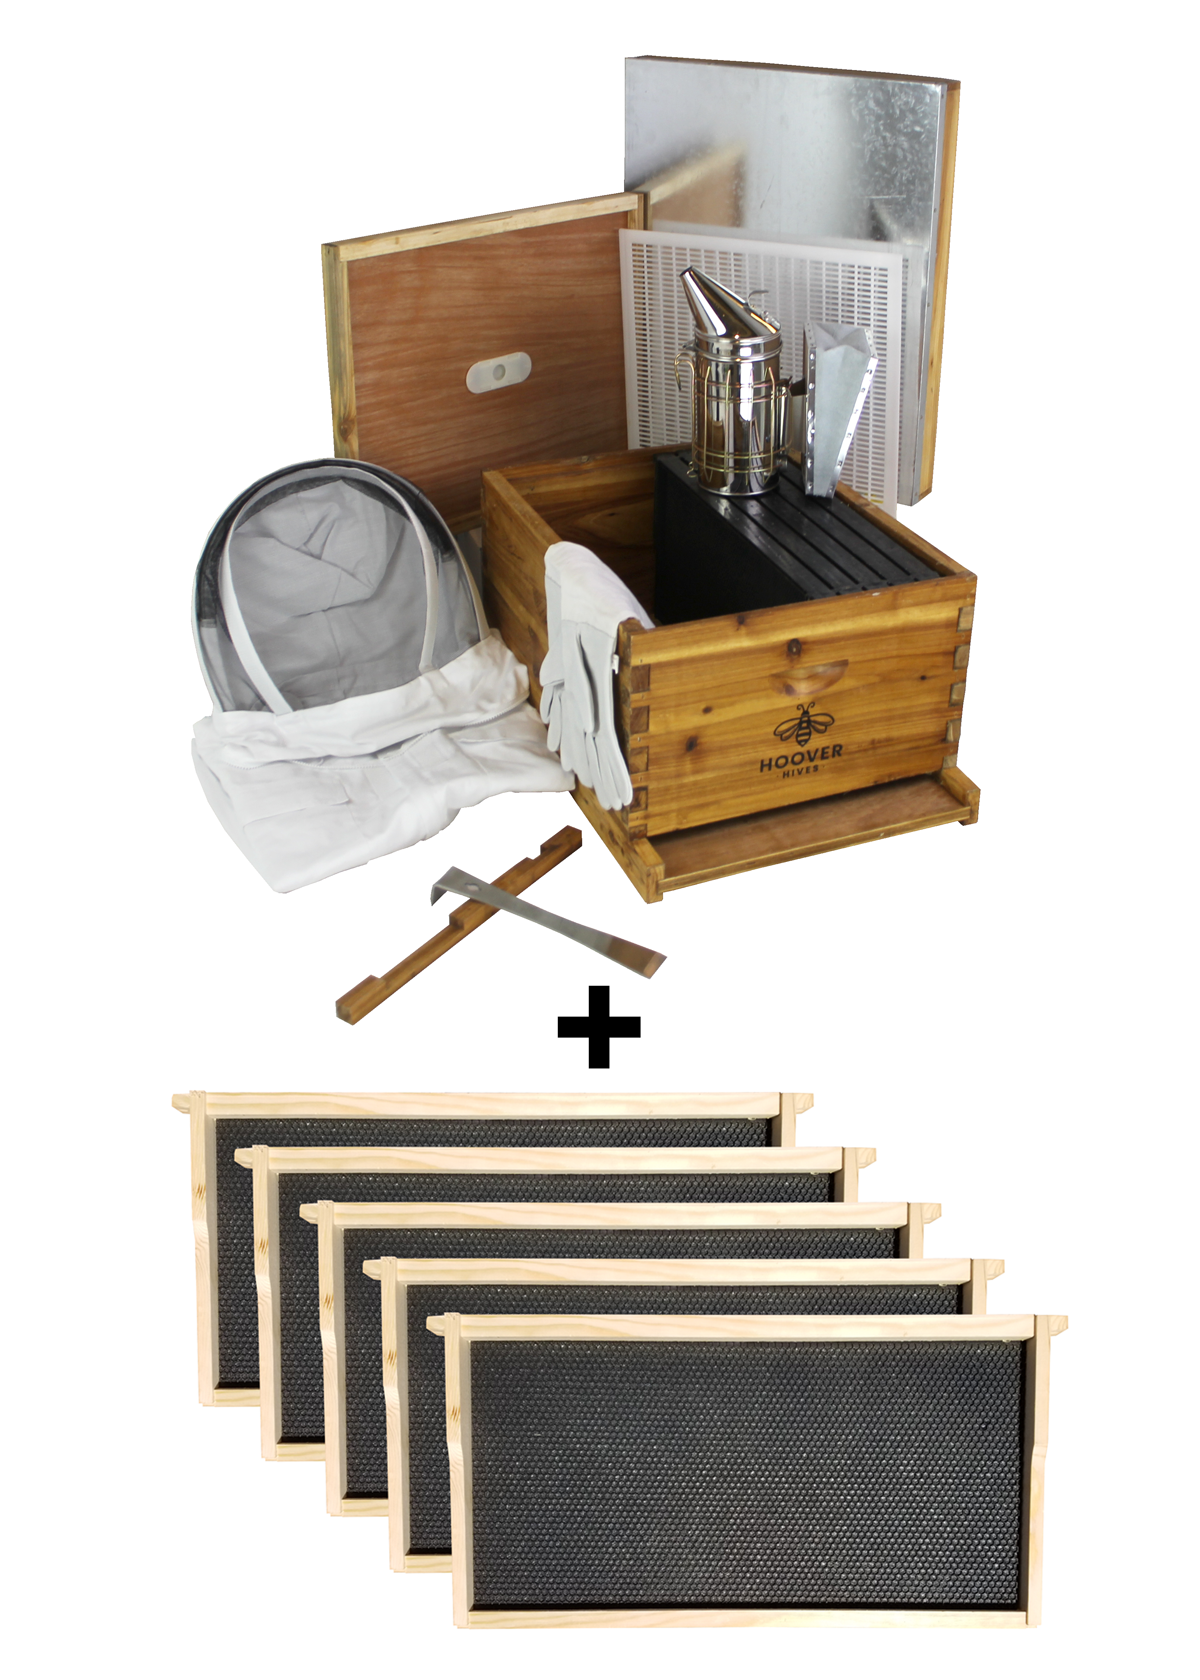 Hoover Hives Wax Coated 10 Frame Beehive Starter Kit With 1 Deep Bee Box & Accessories Starter Kit And 5 Extra Frames